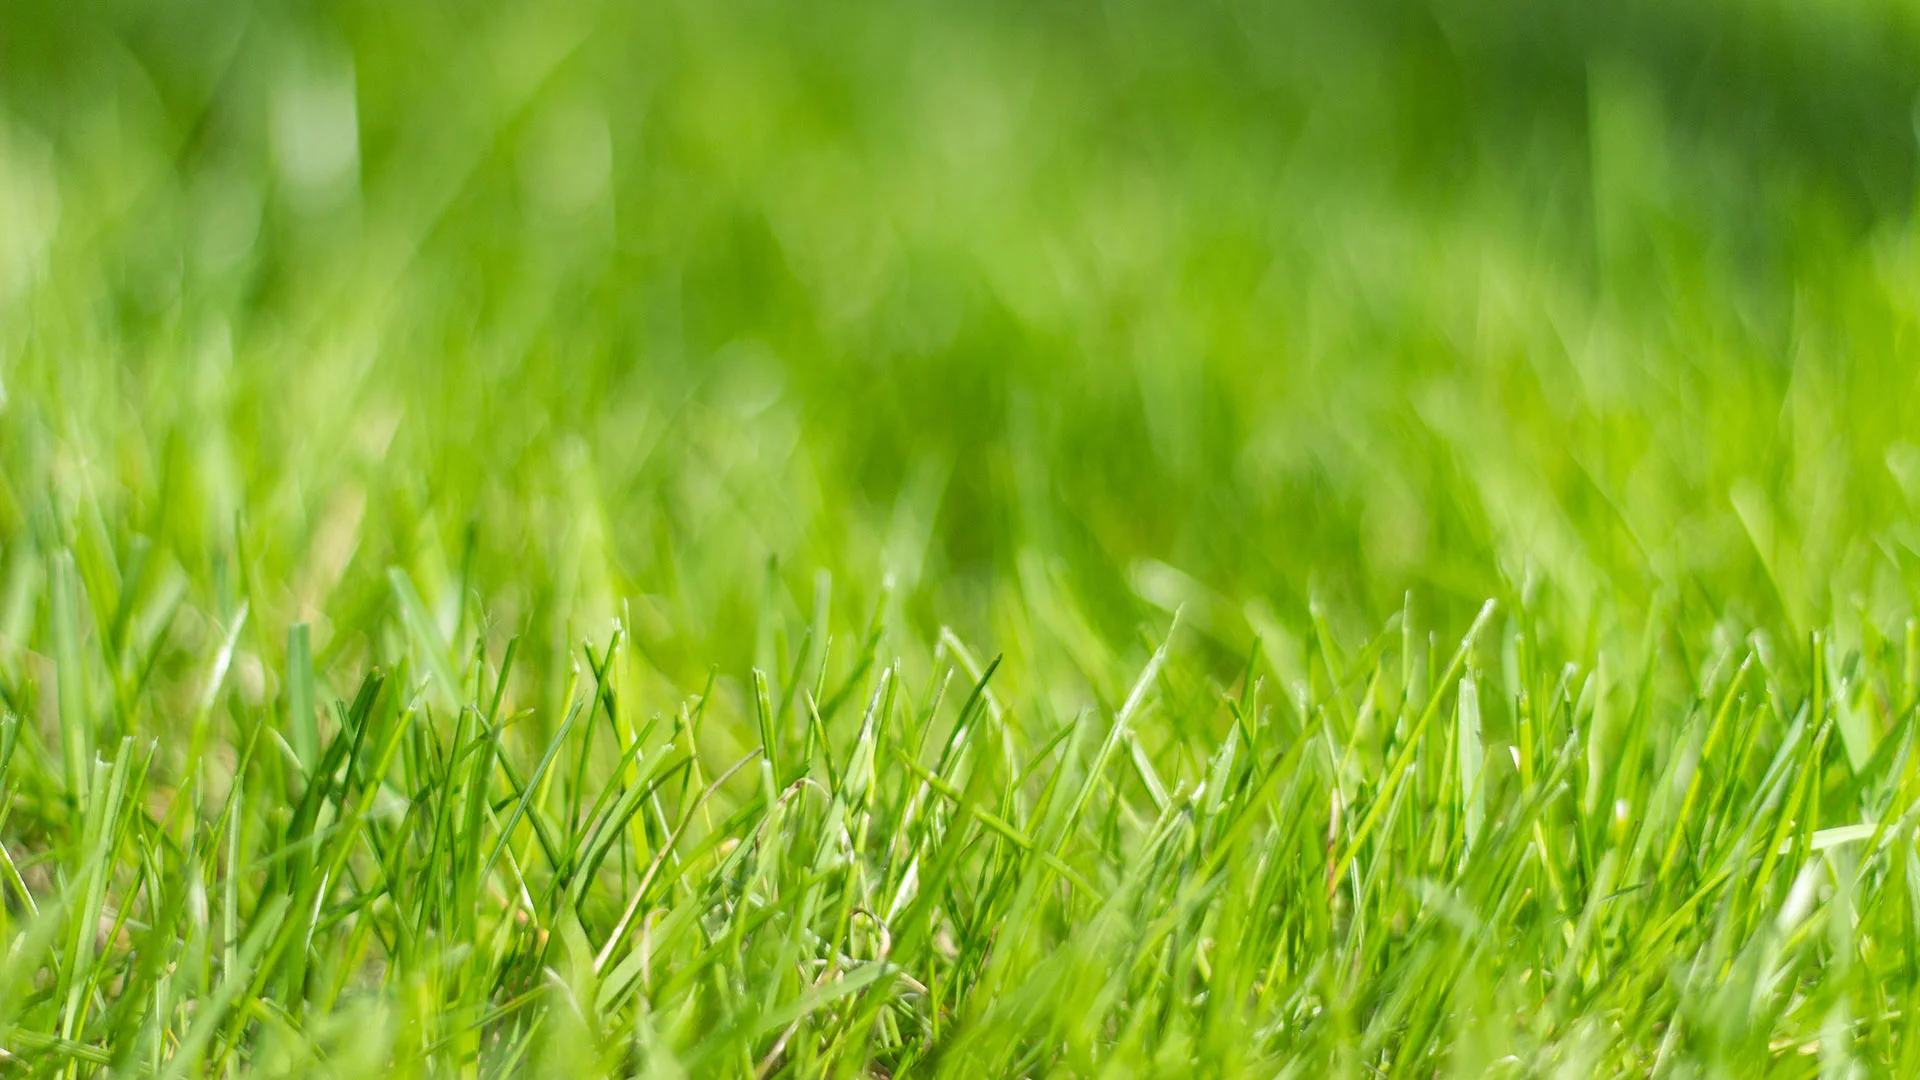 Common Lawn Care Myths and The Real Truth Behind Them